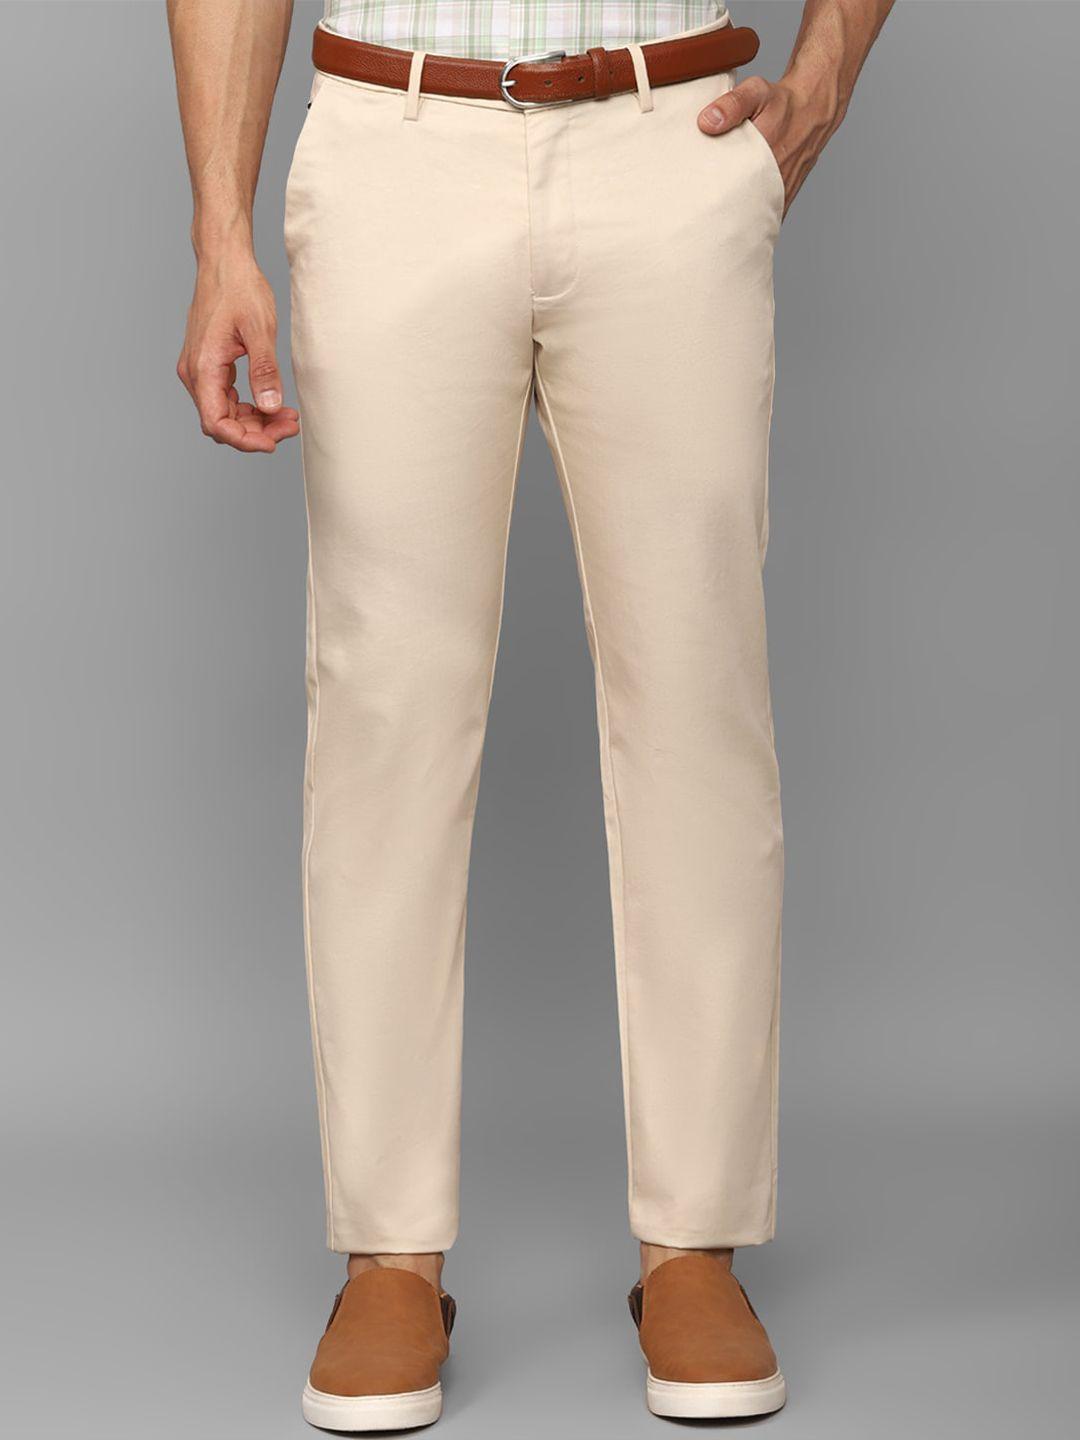 allen-solly-men-mid-rise-chinos-trousers